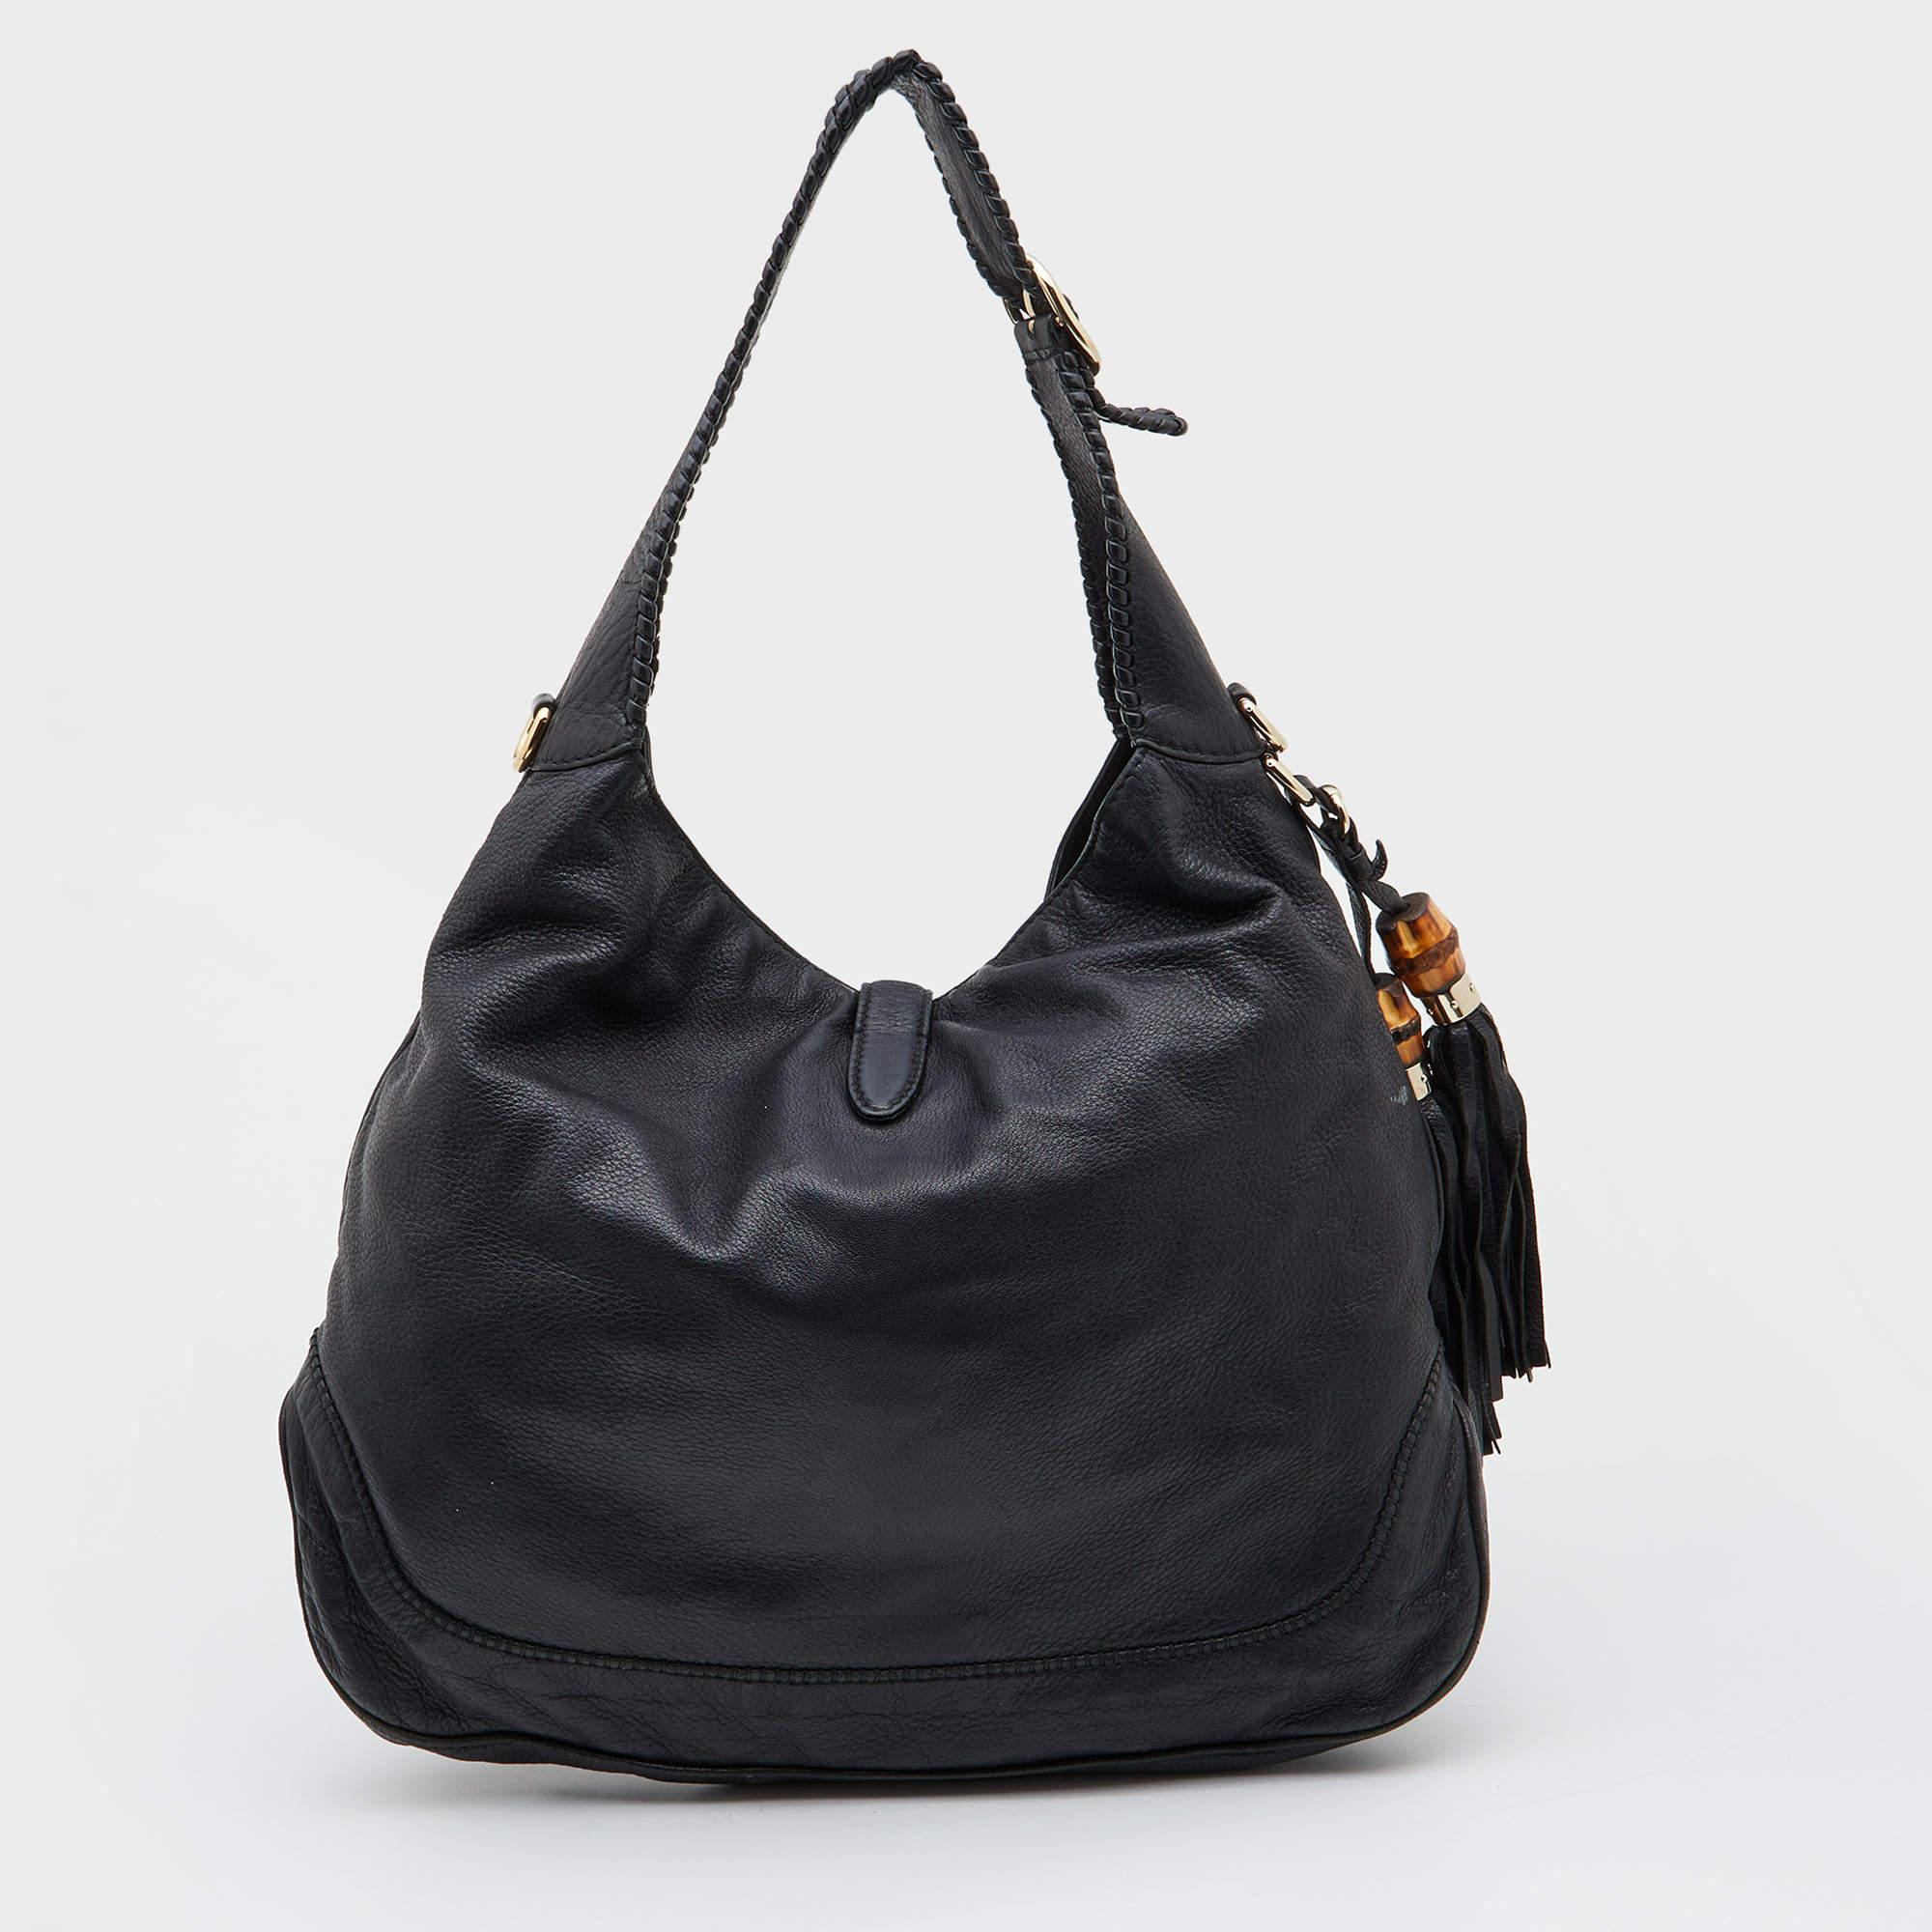 Gucci Black Leather New Jackie Hobo 2